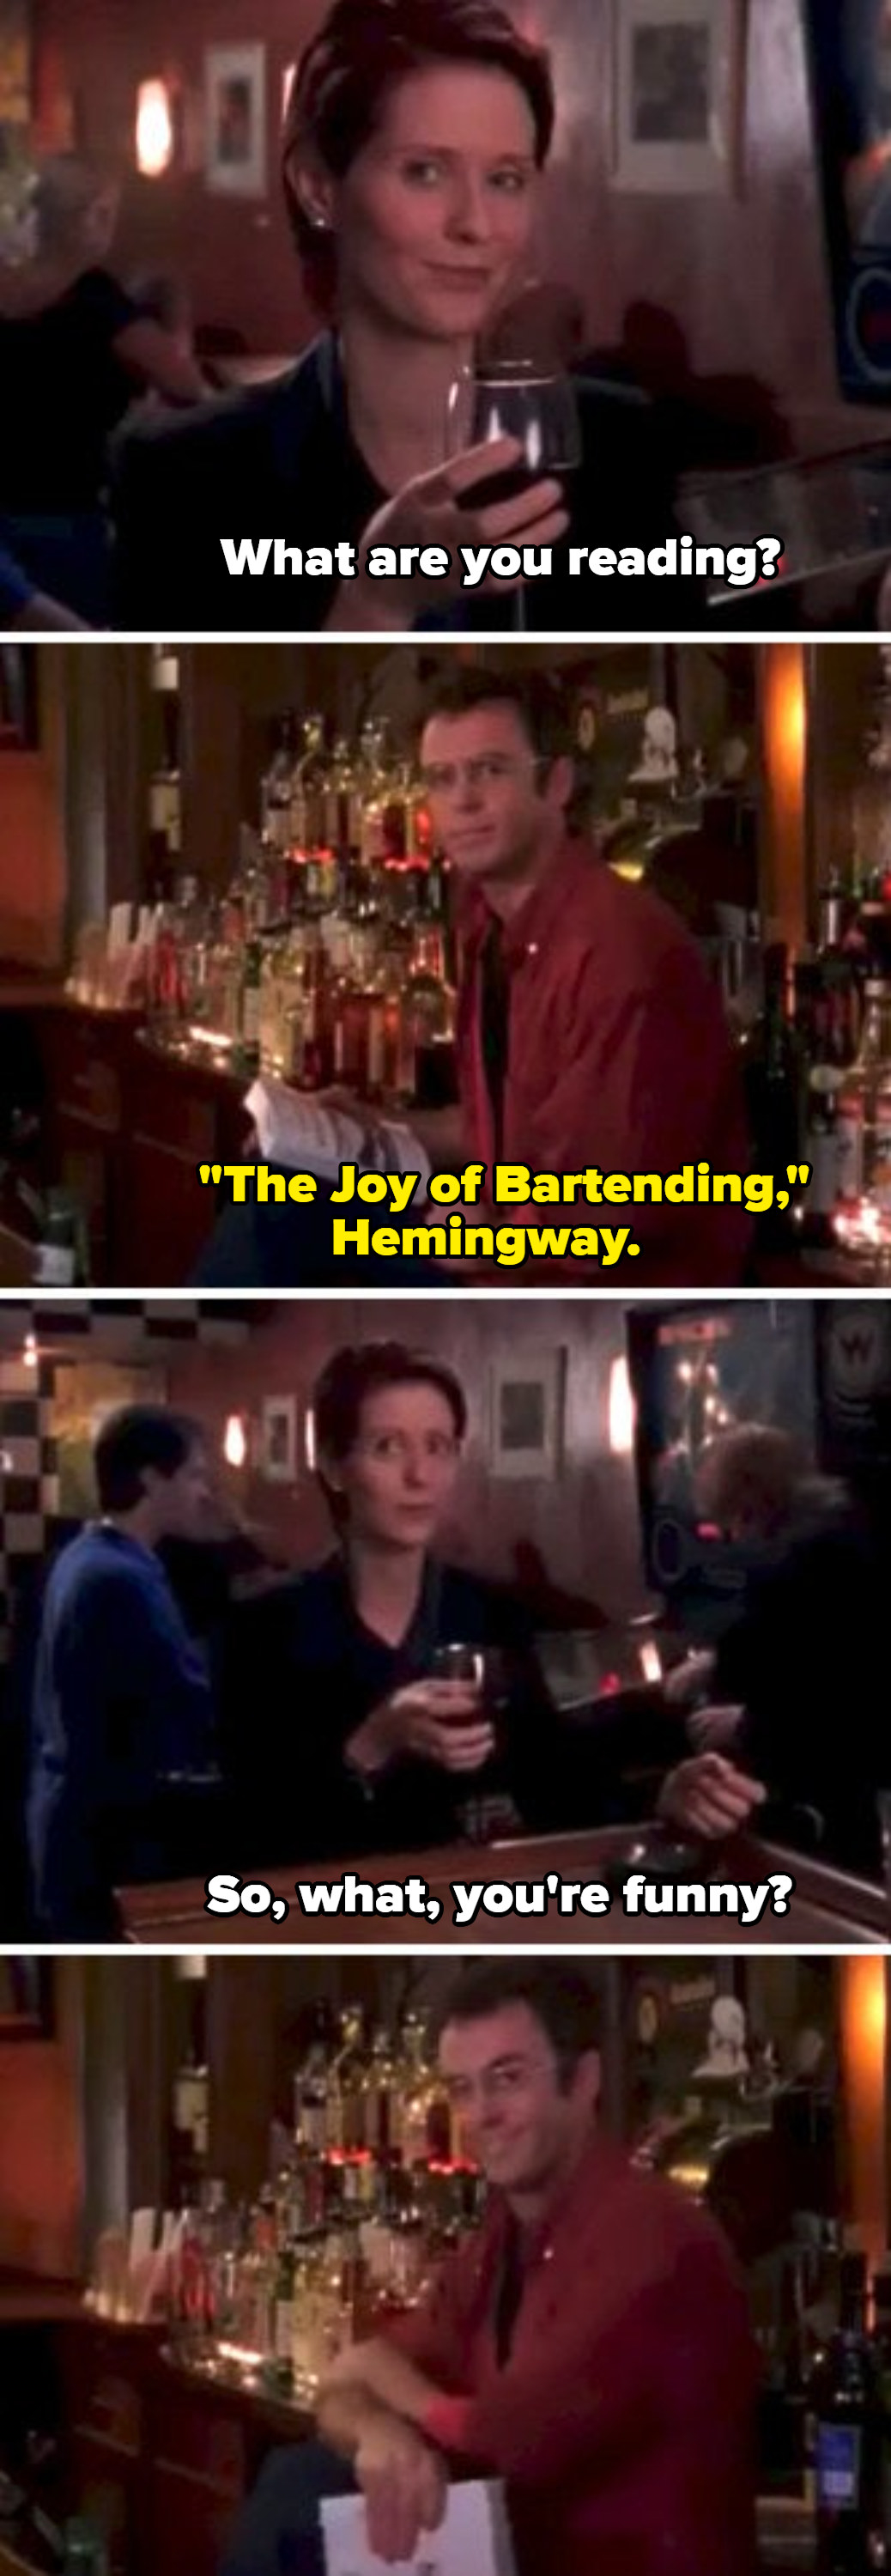 Miranda and Steve meeting for the first time at the bar in Season 2